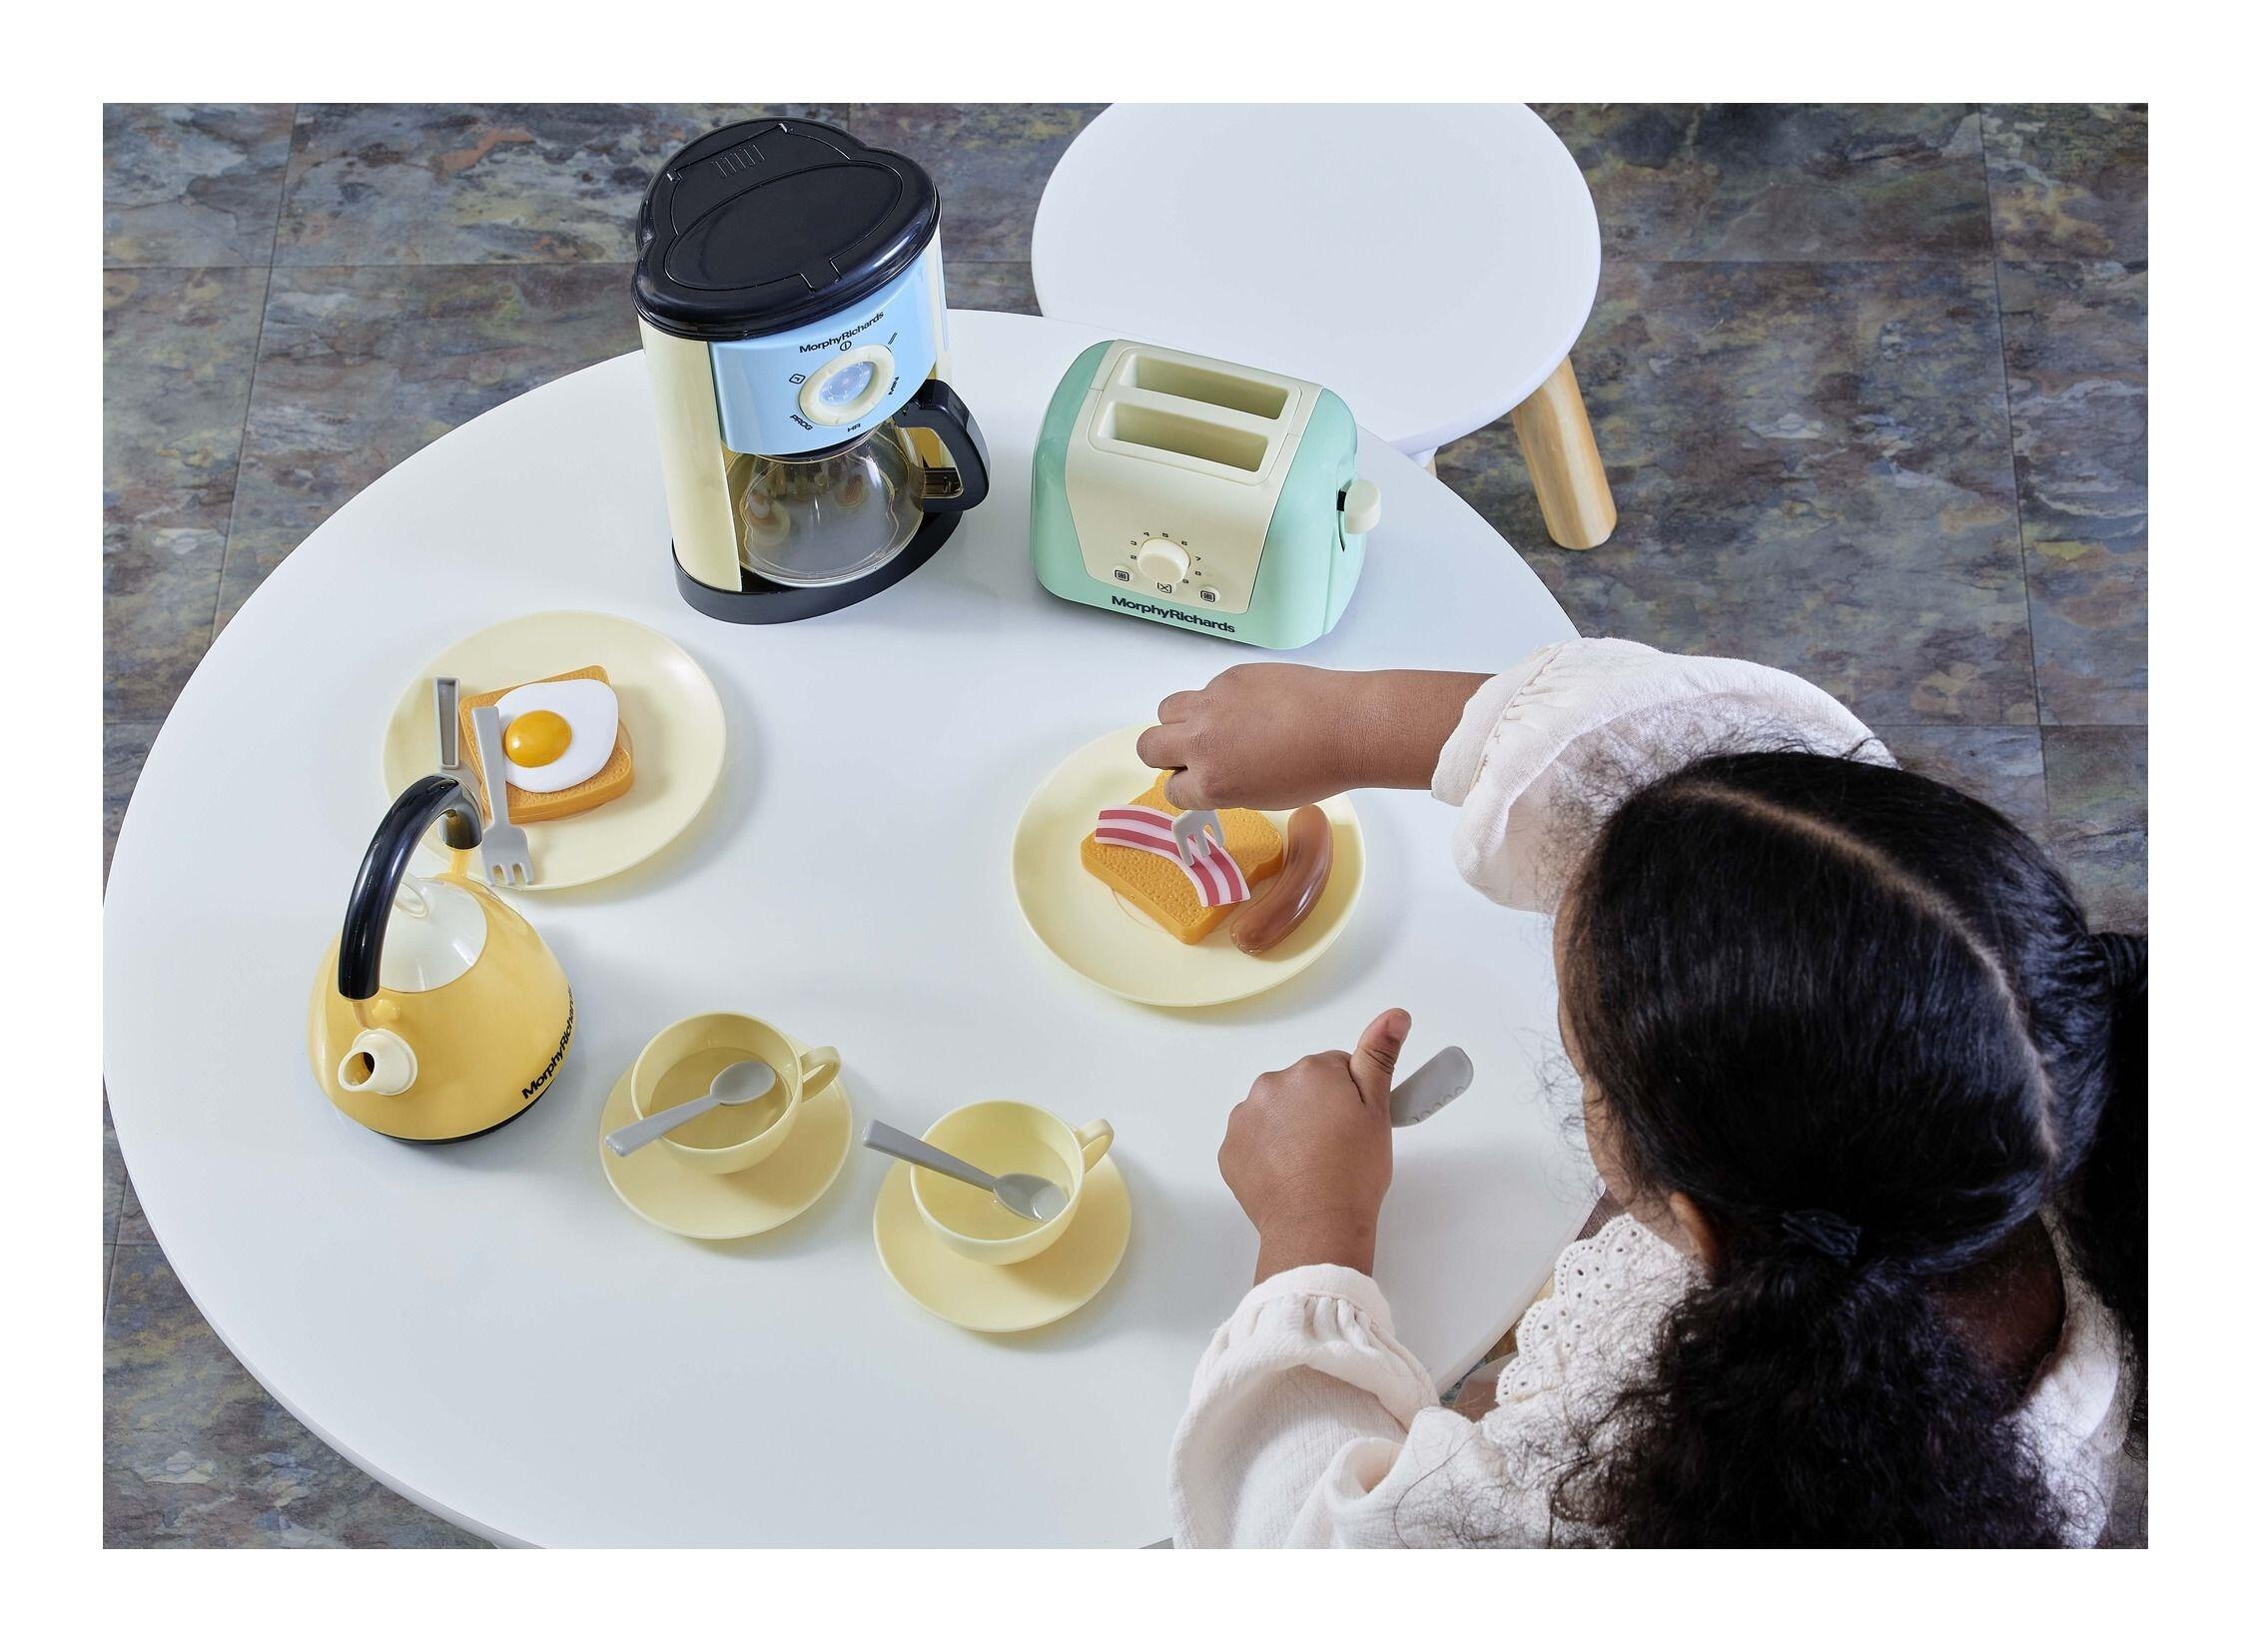 Morphy Richards Kitchen Playset | Kettle, Toaster, Coffee Maker